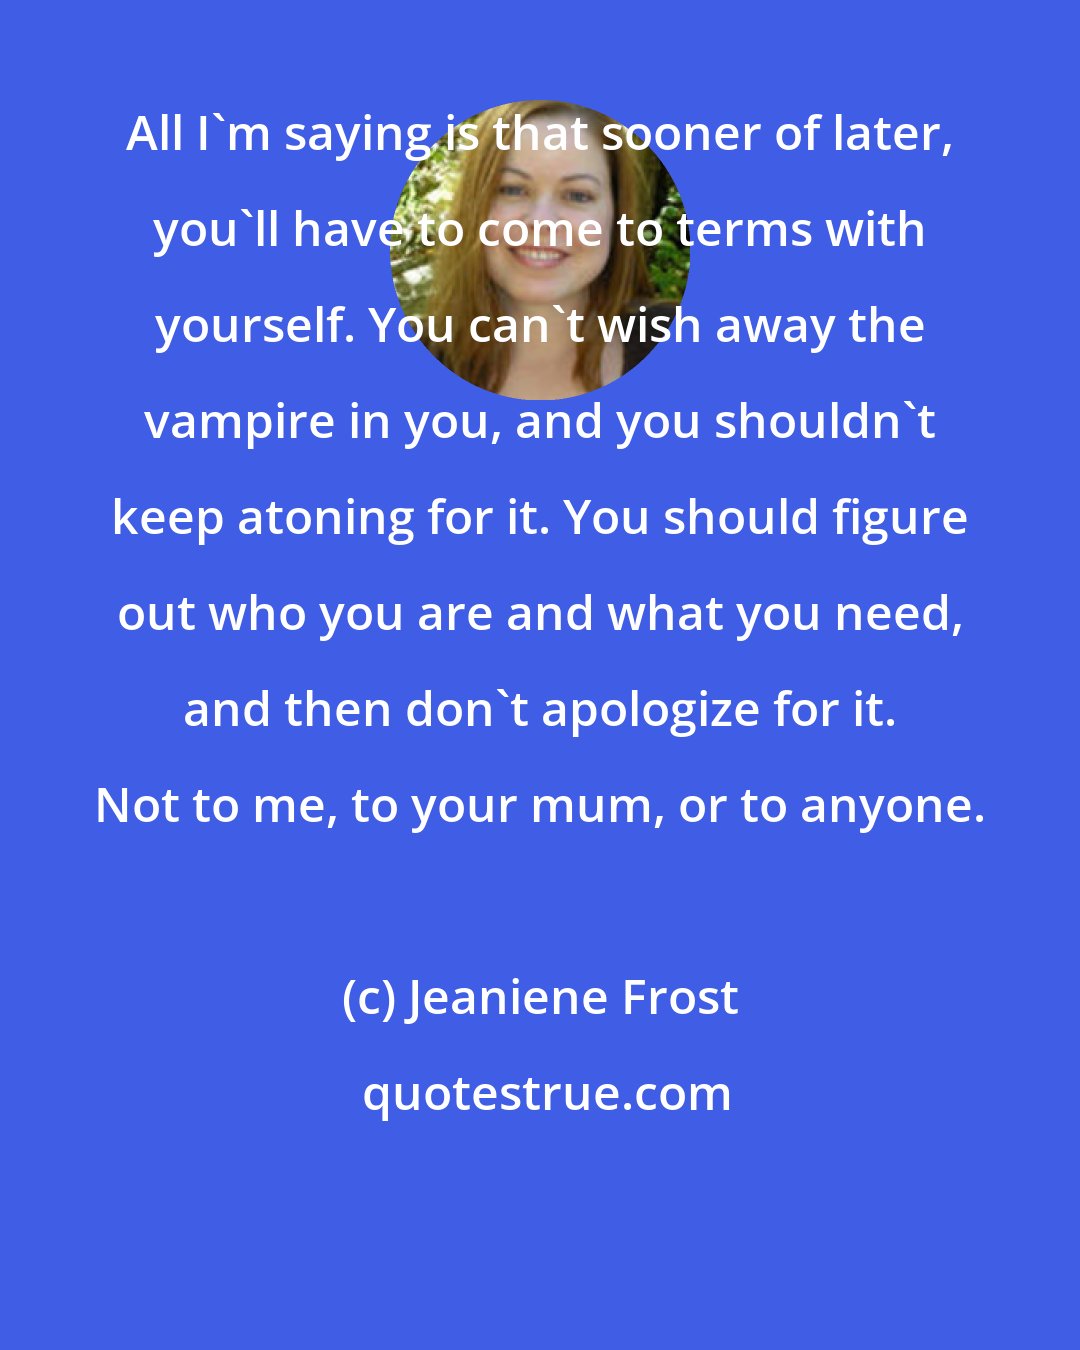 Jeaniene Frost: All I'm saying is that sooner of later, you'll have to come to terms with yourself. You can't wish away the vampire in you, and you shouldn't keep atoning for it. You should figure out who you are and what you need, and then don't apologize for it. Not to me, to your mum, or to anyone.